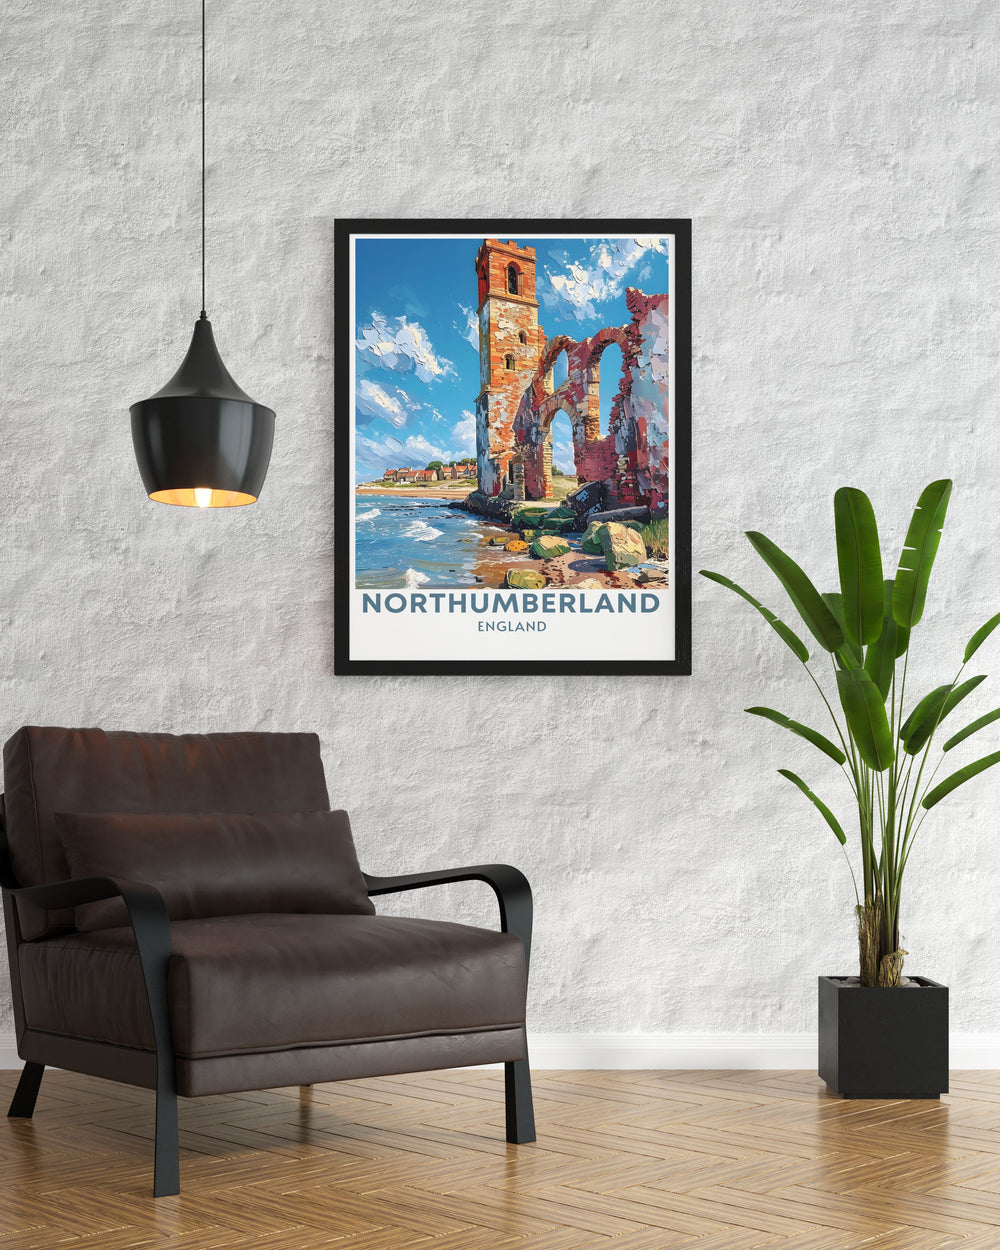 Retro railway print capturing the picturesque harbor of Seahouses with Holy Island in the background. This detailed artwork brings the timeless beauty of North Northumberland into your home and is ideal for any art collection.